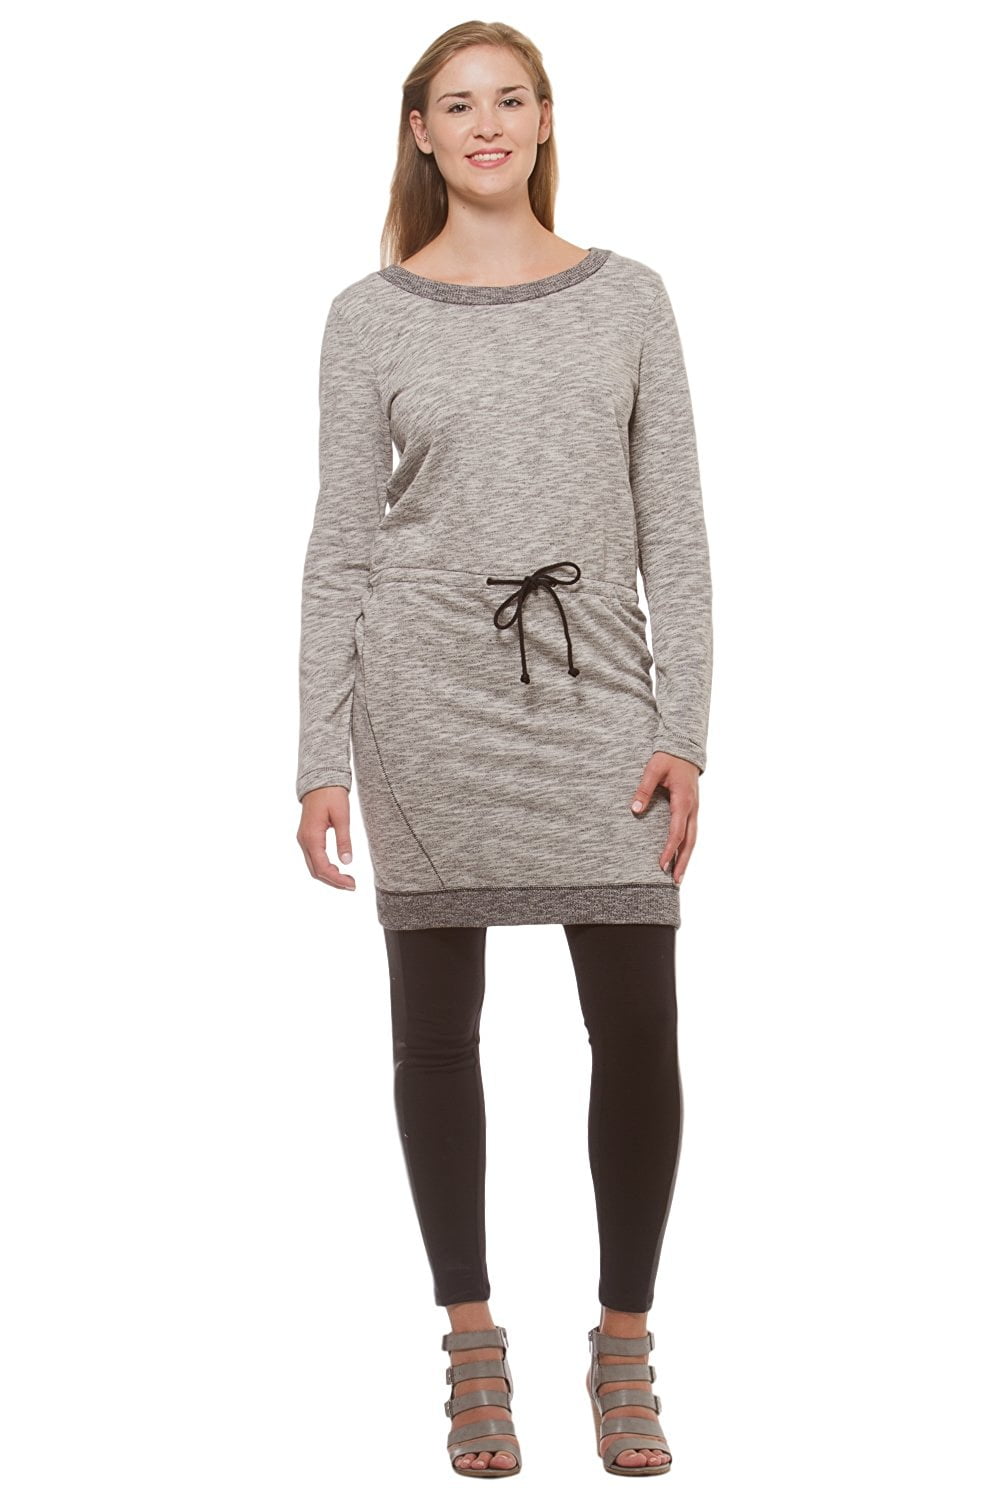 sweater dress with converse